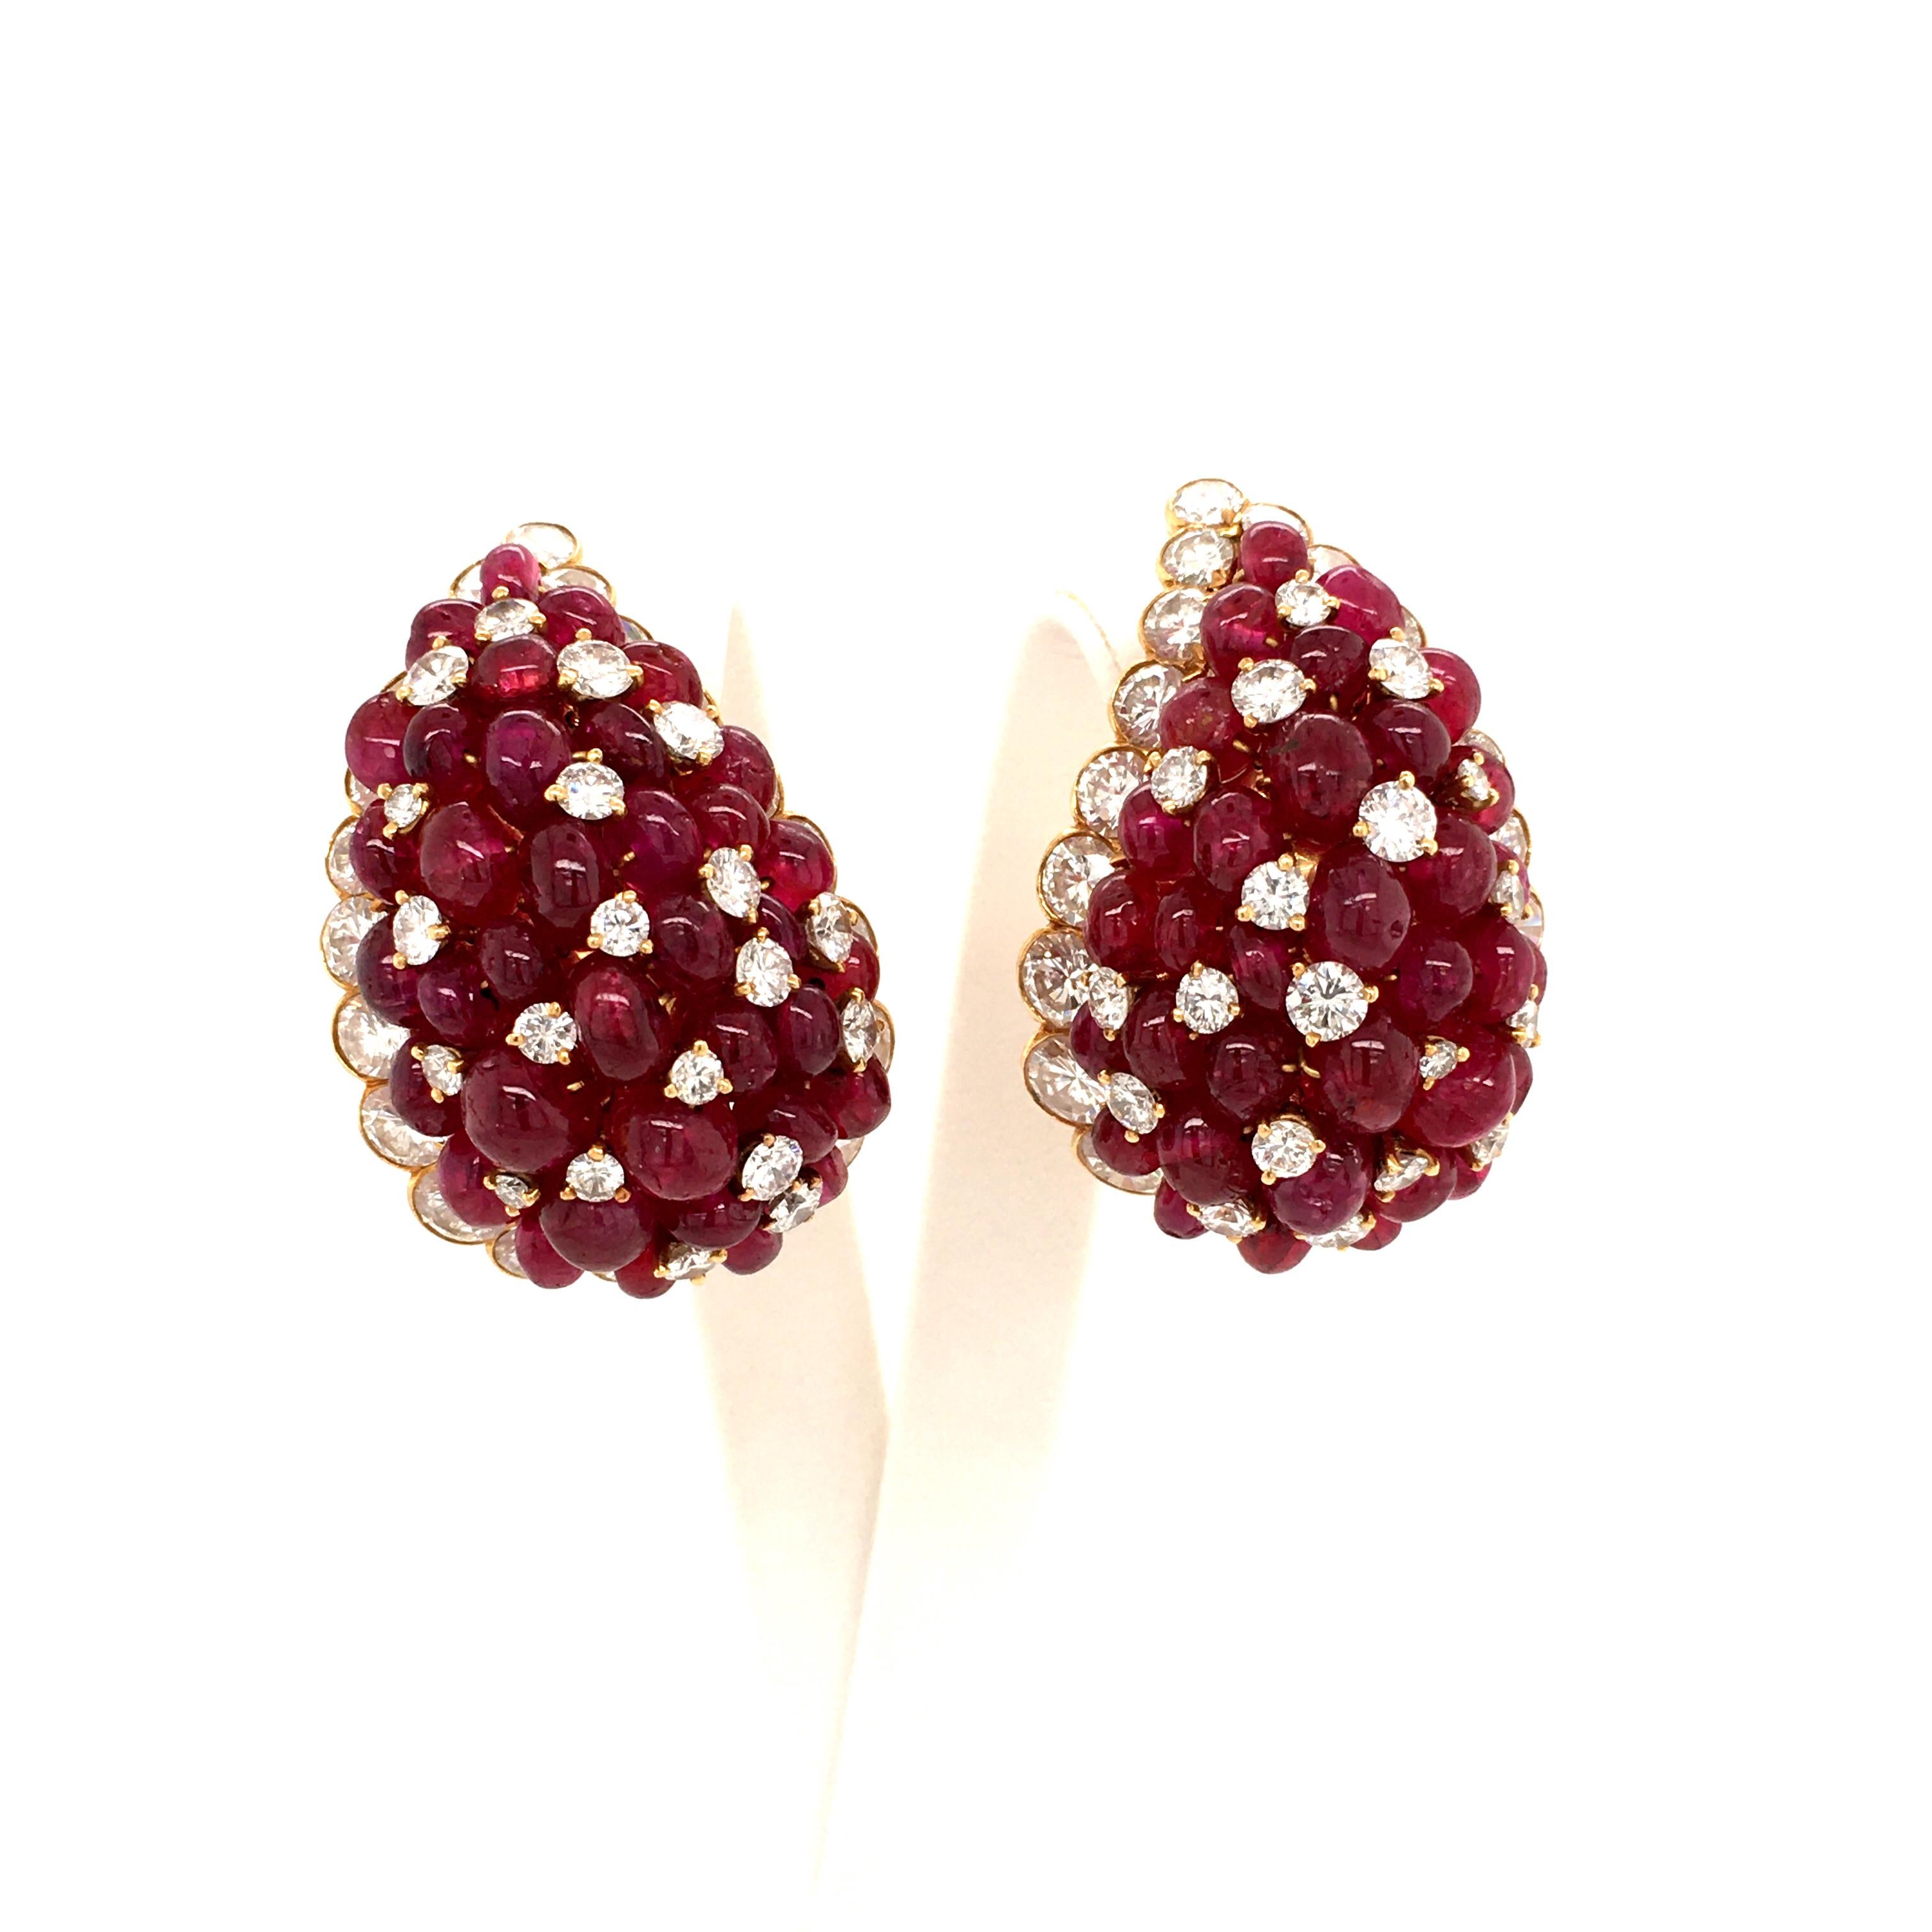 Modern Van Cleef & Arpels Ruby and Diamond Ear Clips in Yellow Gold 750